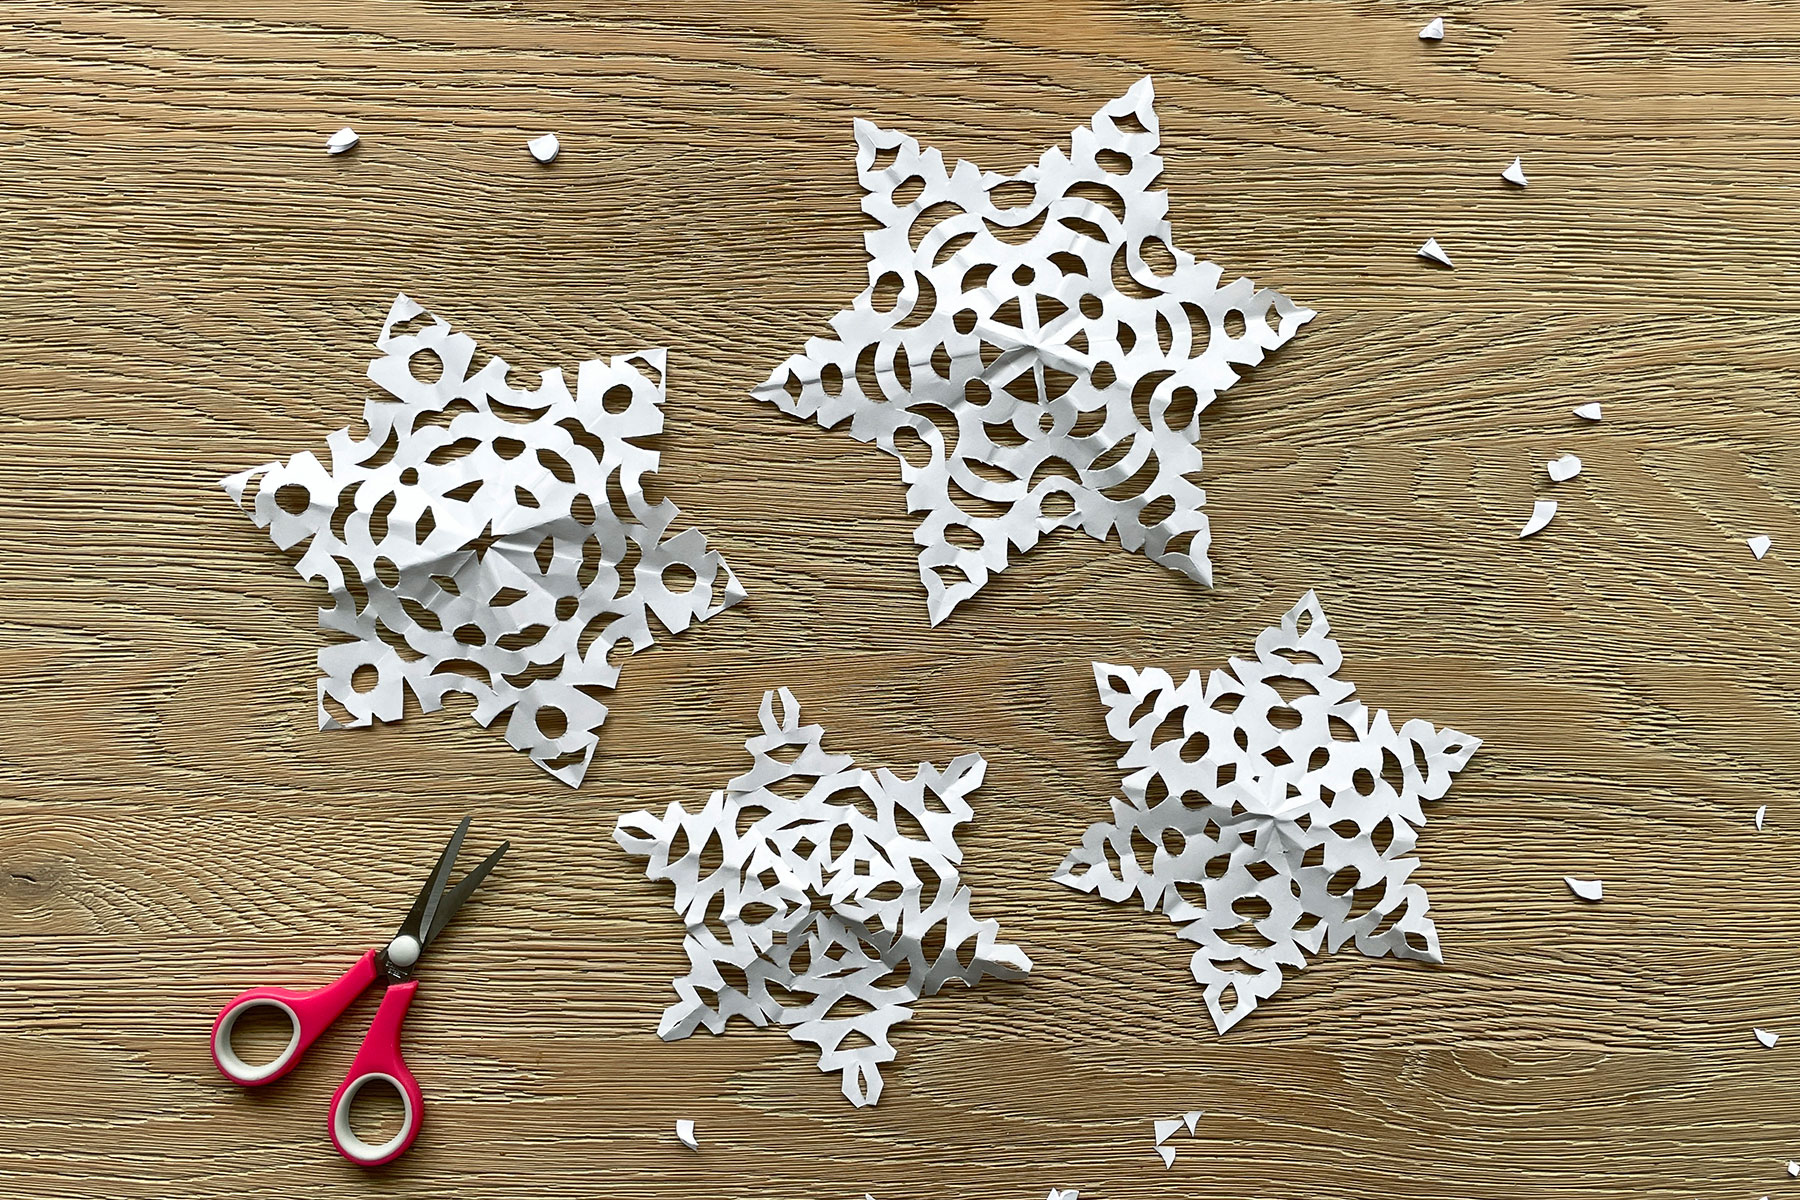 A photo of four paper snowflakes laid out next to each other on a wooden table alongside a pair of scissors